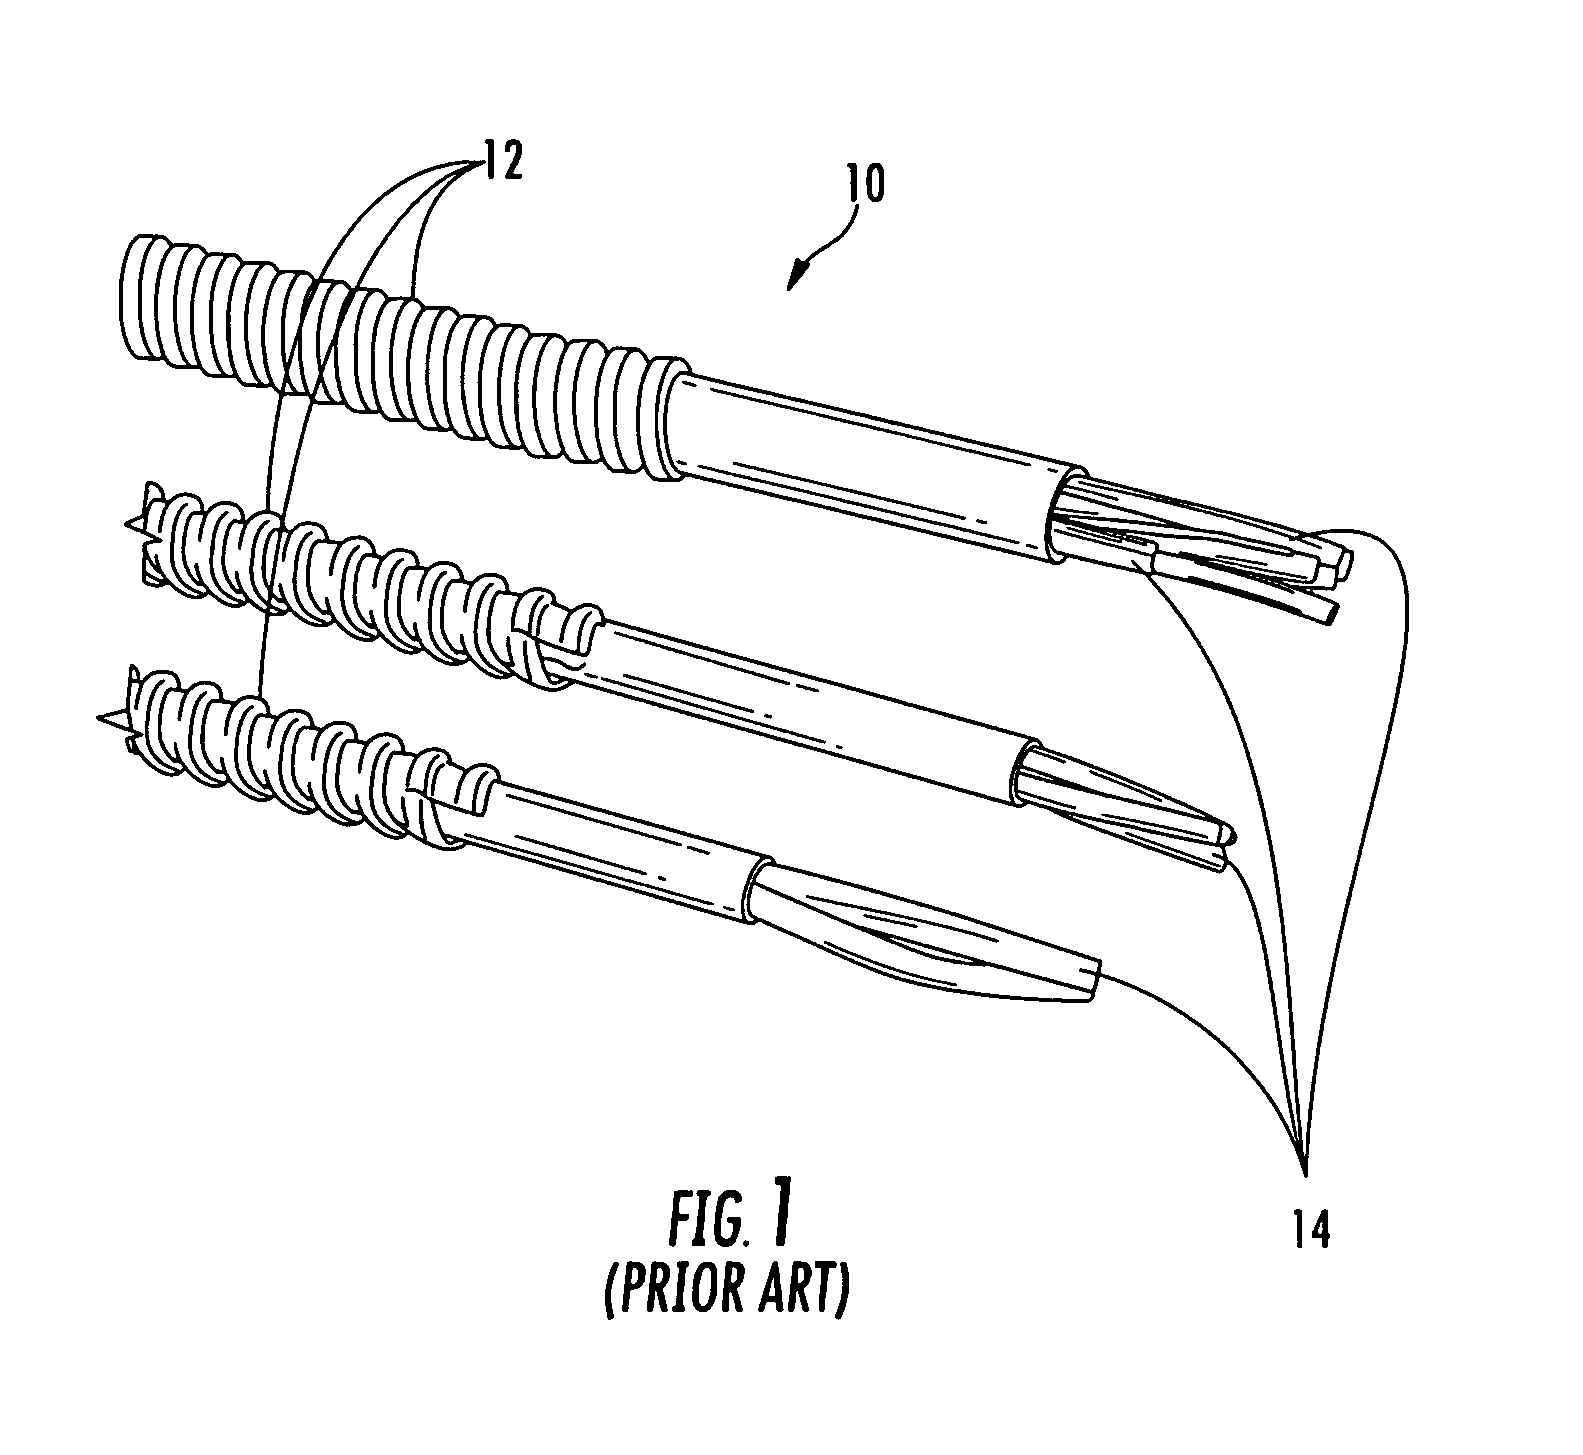 Armored fiber optic assemblies and methods of making the same